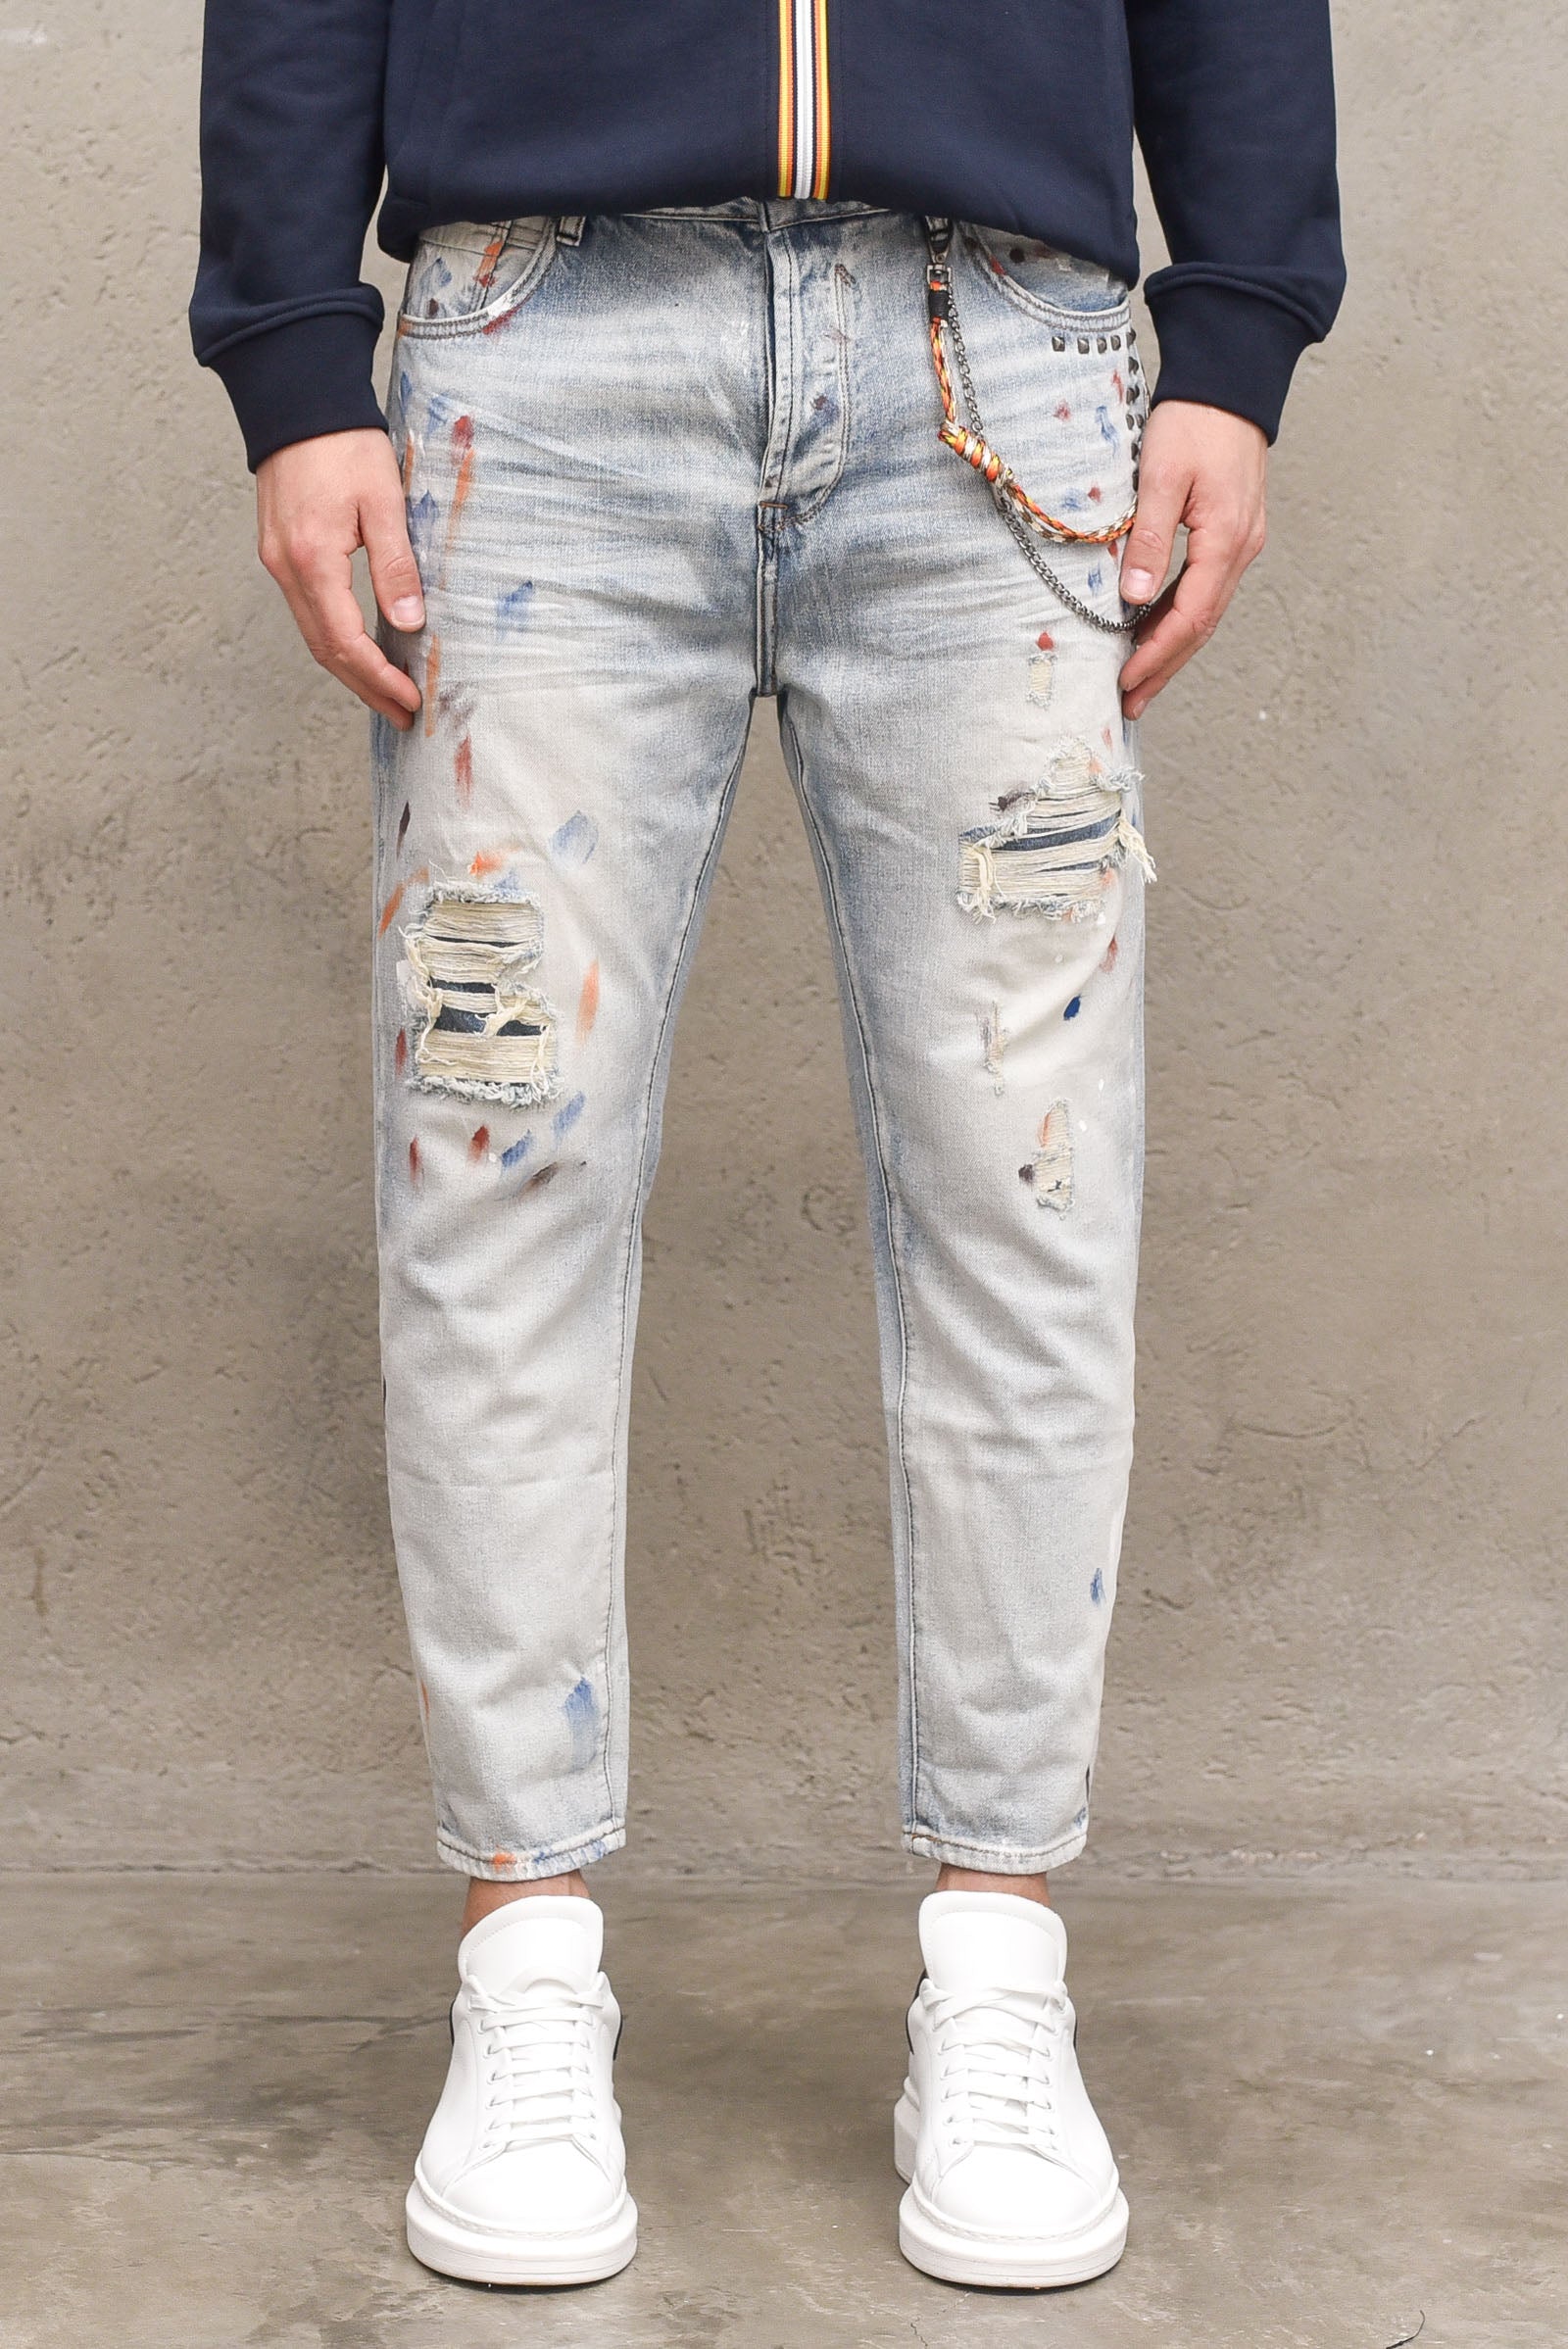 Men's  trousers mike carrot tears and paint splashes  jeans man  - 4